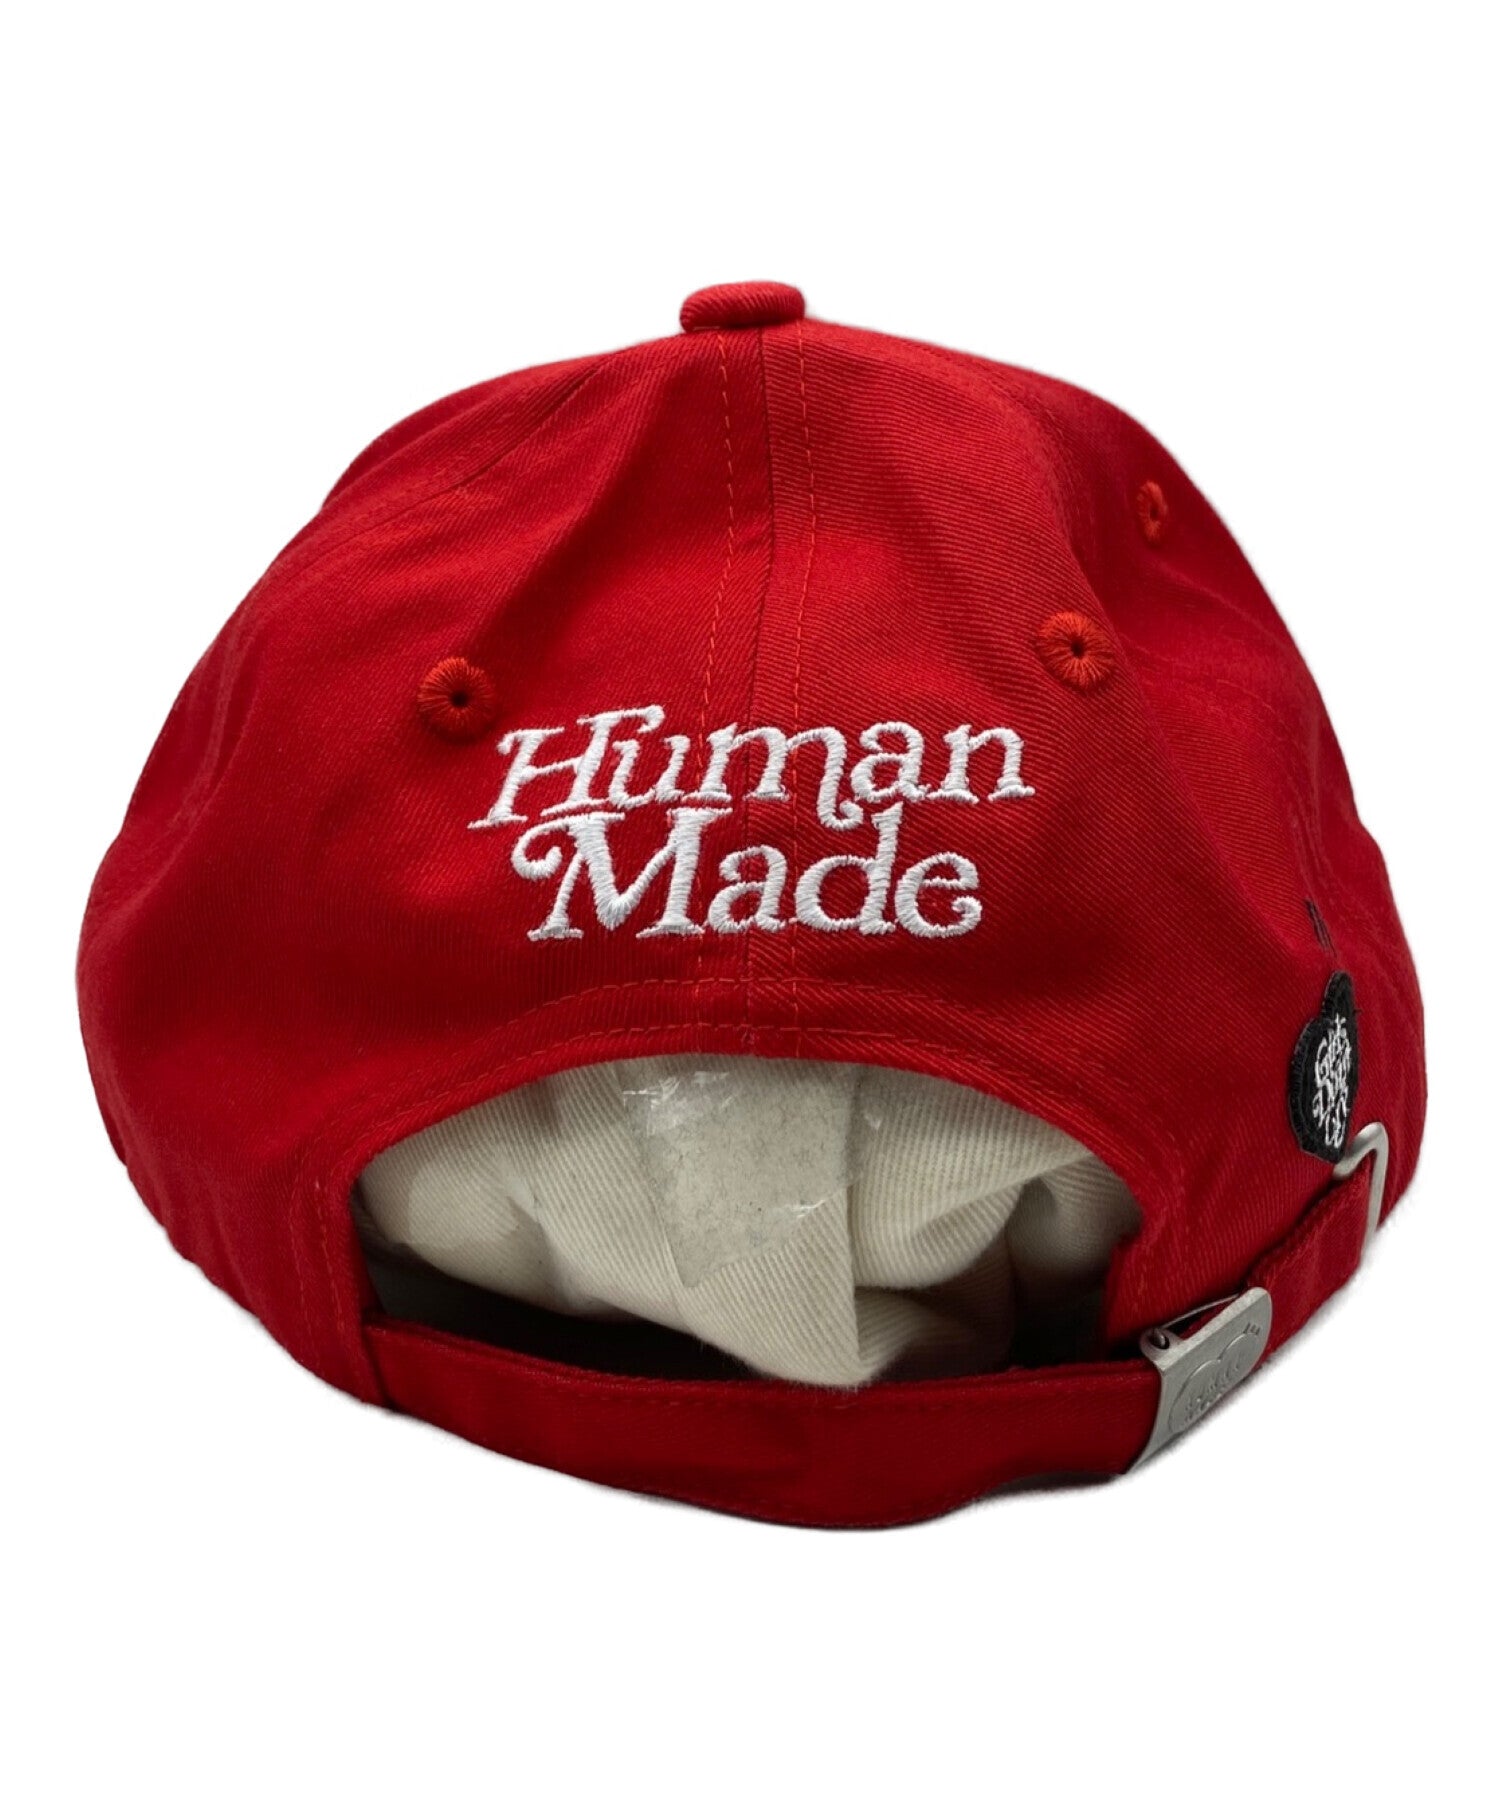 HUMAN MADE BMW GIRLS DON'T CRY キャップ100%COTTONCOLOR - キャップ